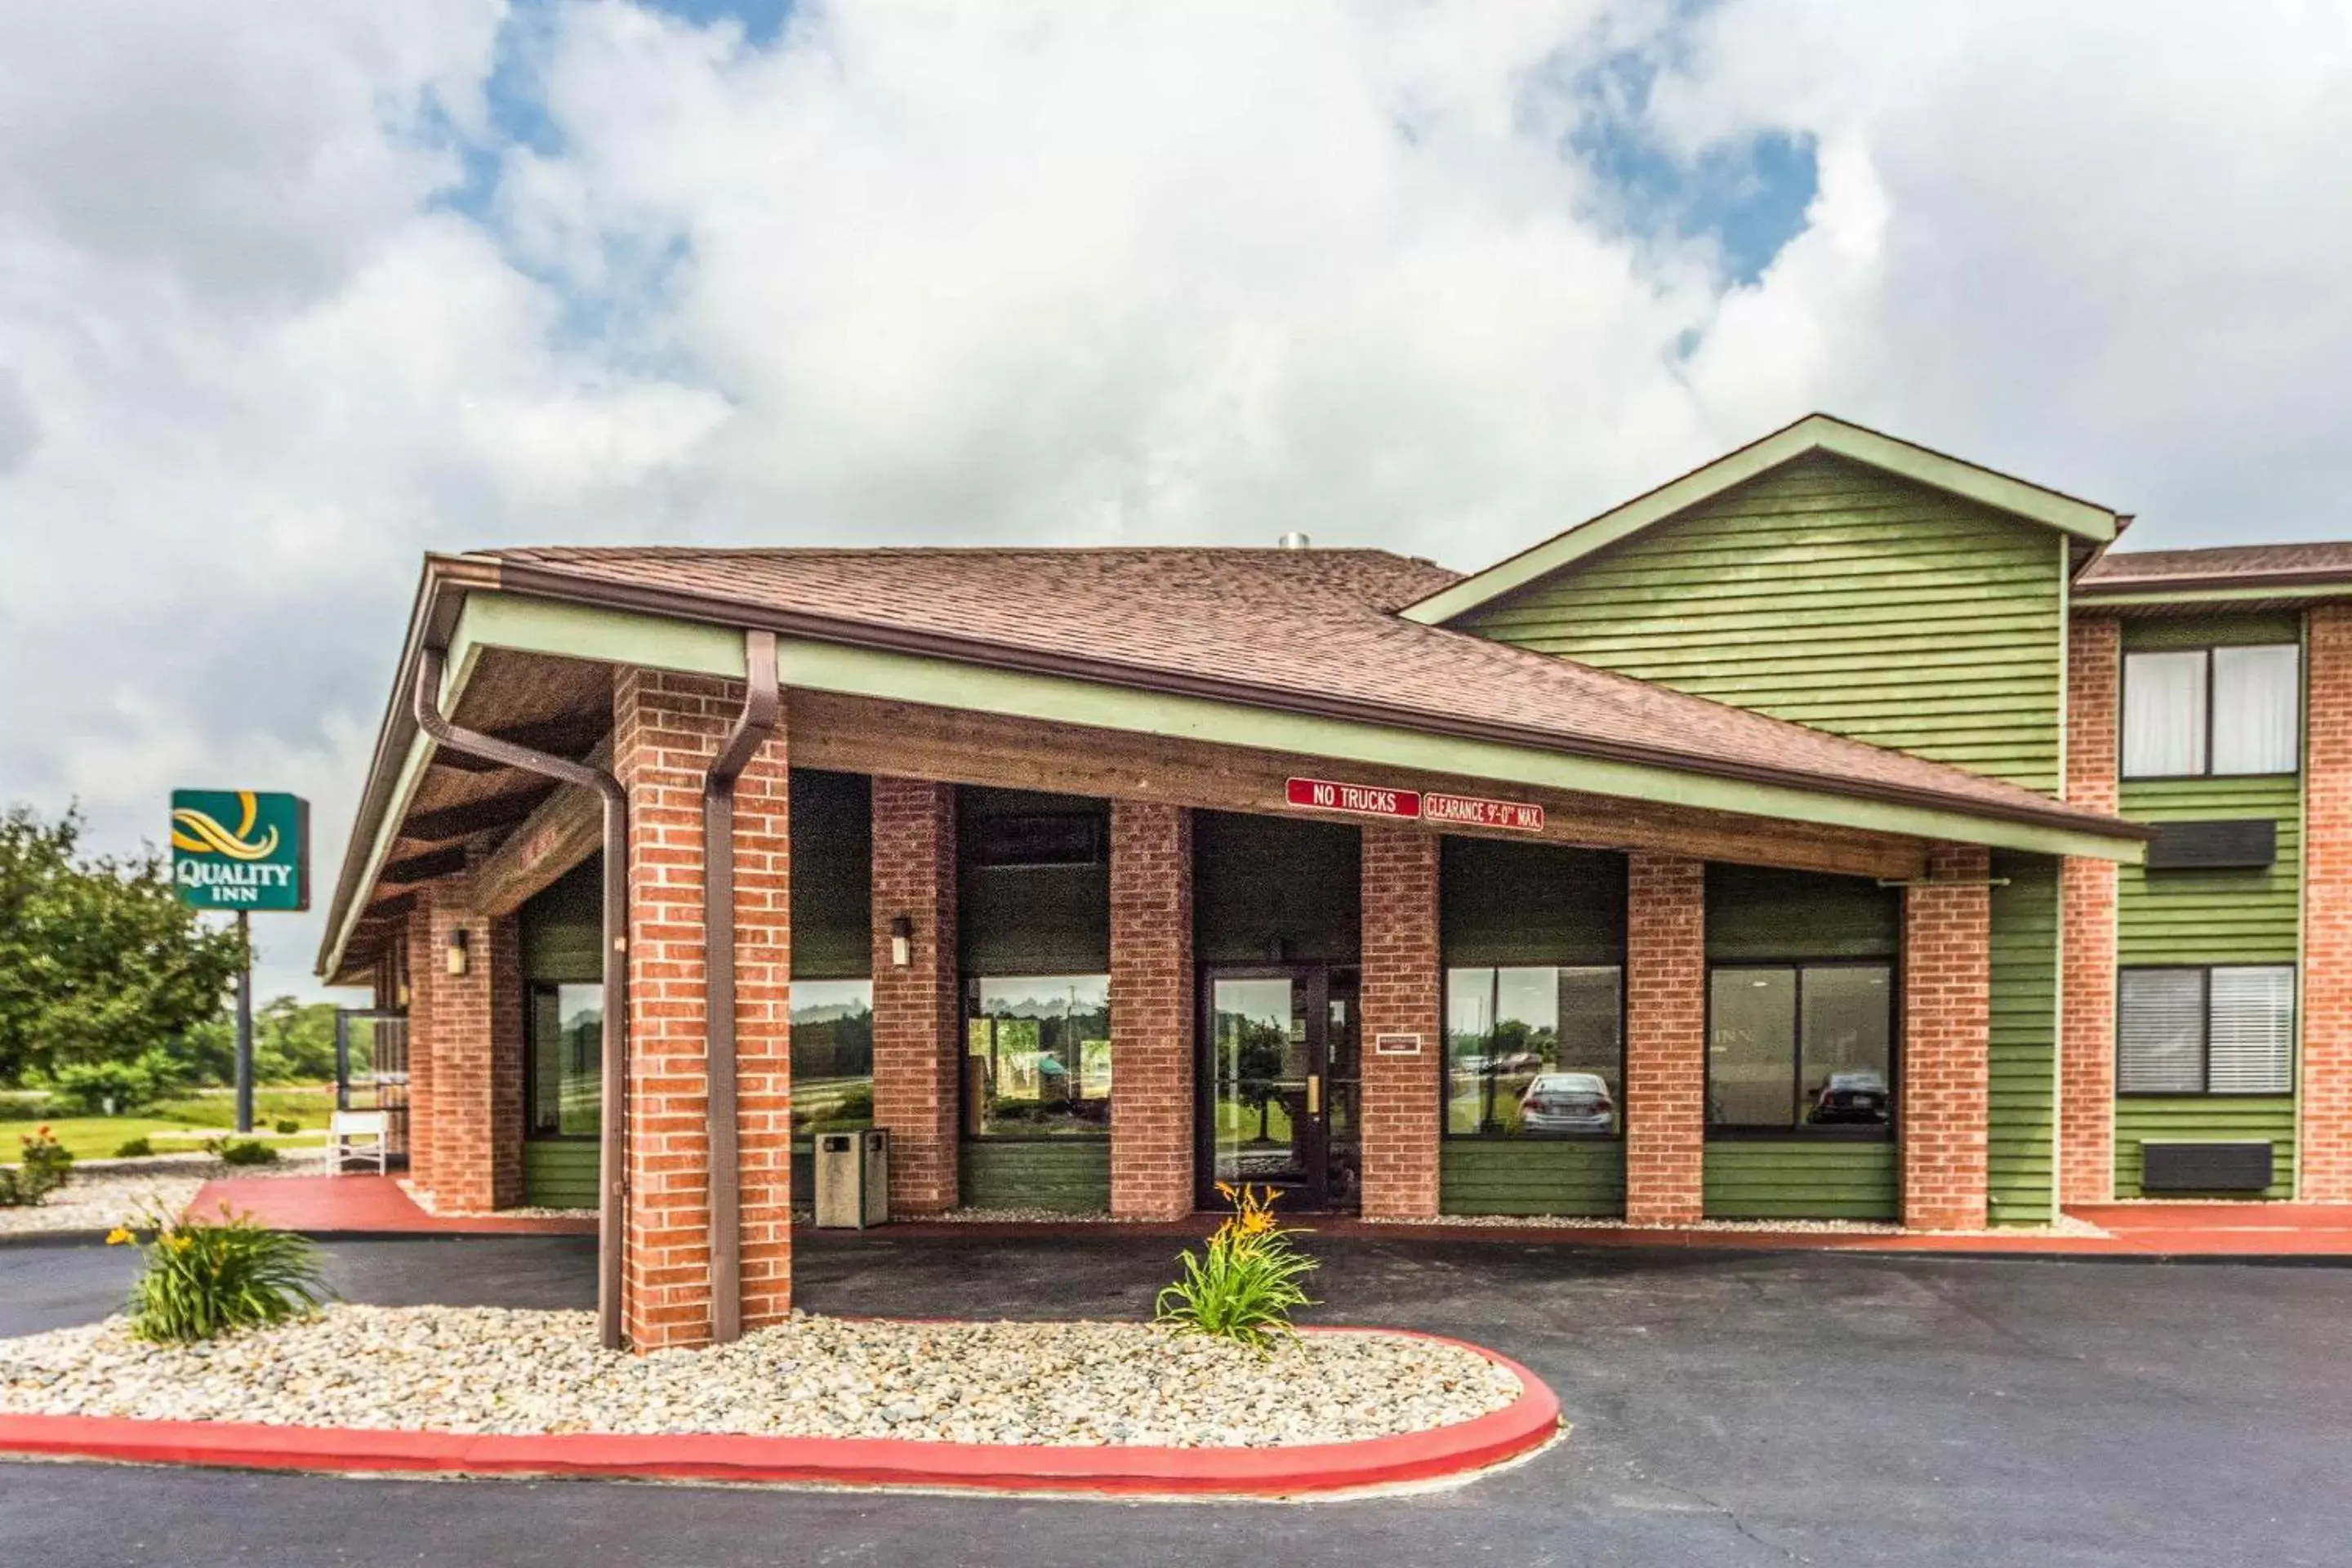 Property Building in Quality Inn Columbia City near US-30